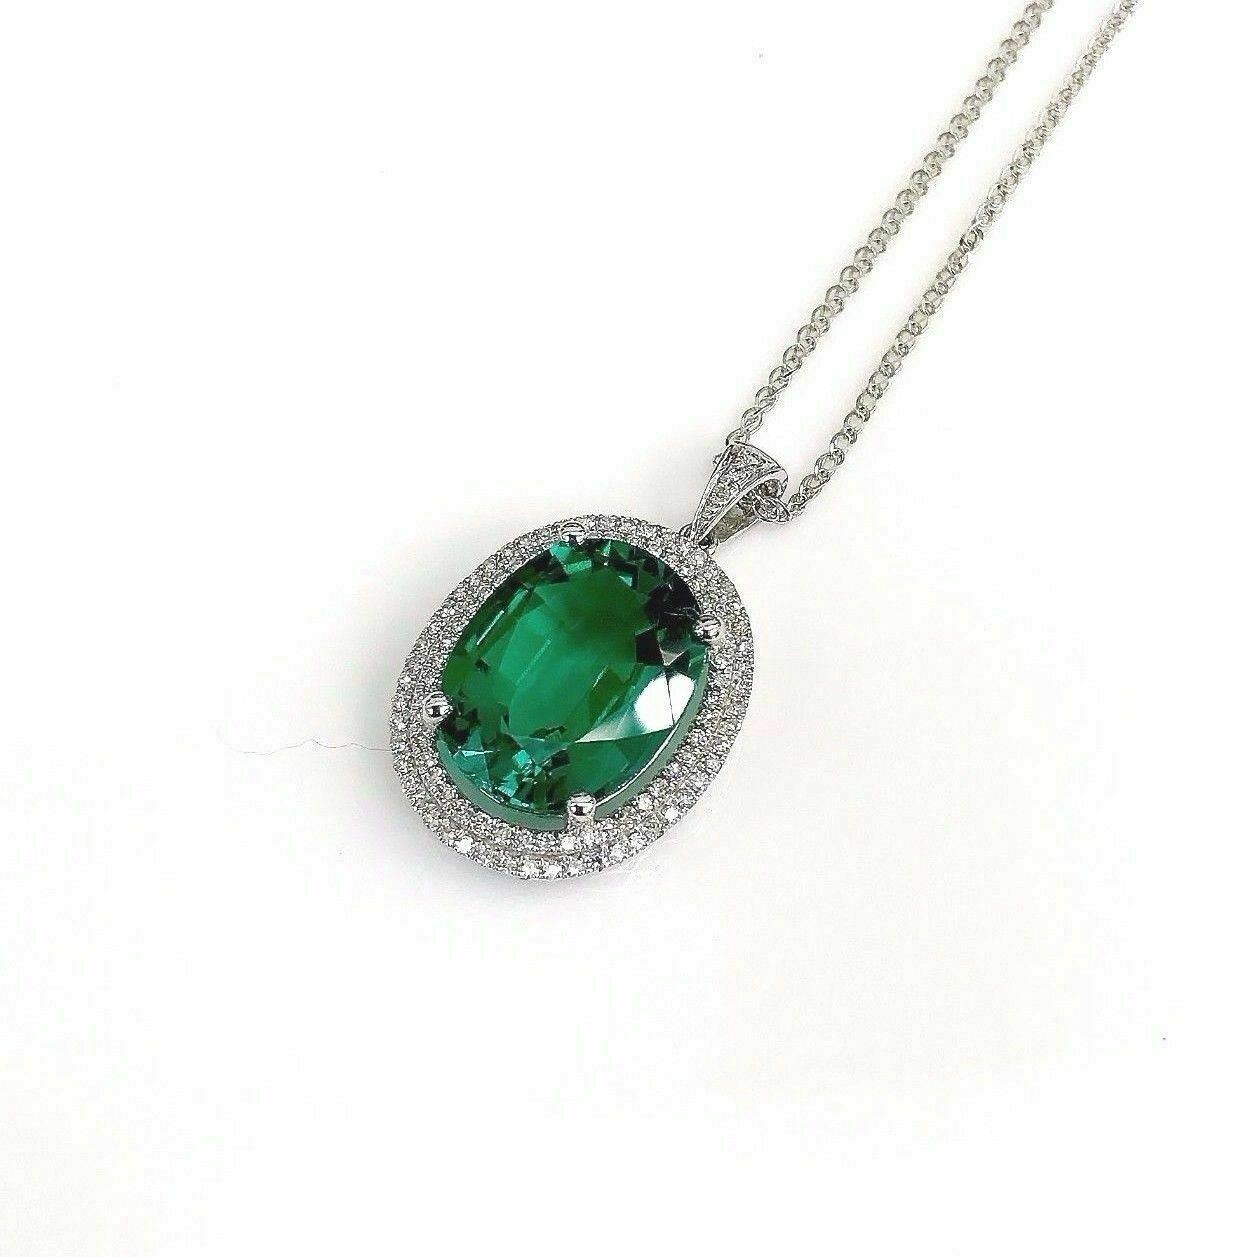 8.38 TCW Natural Oval Green Chatham & Diamond Accents Pendant 14k White Gold